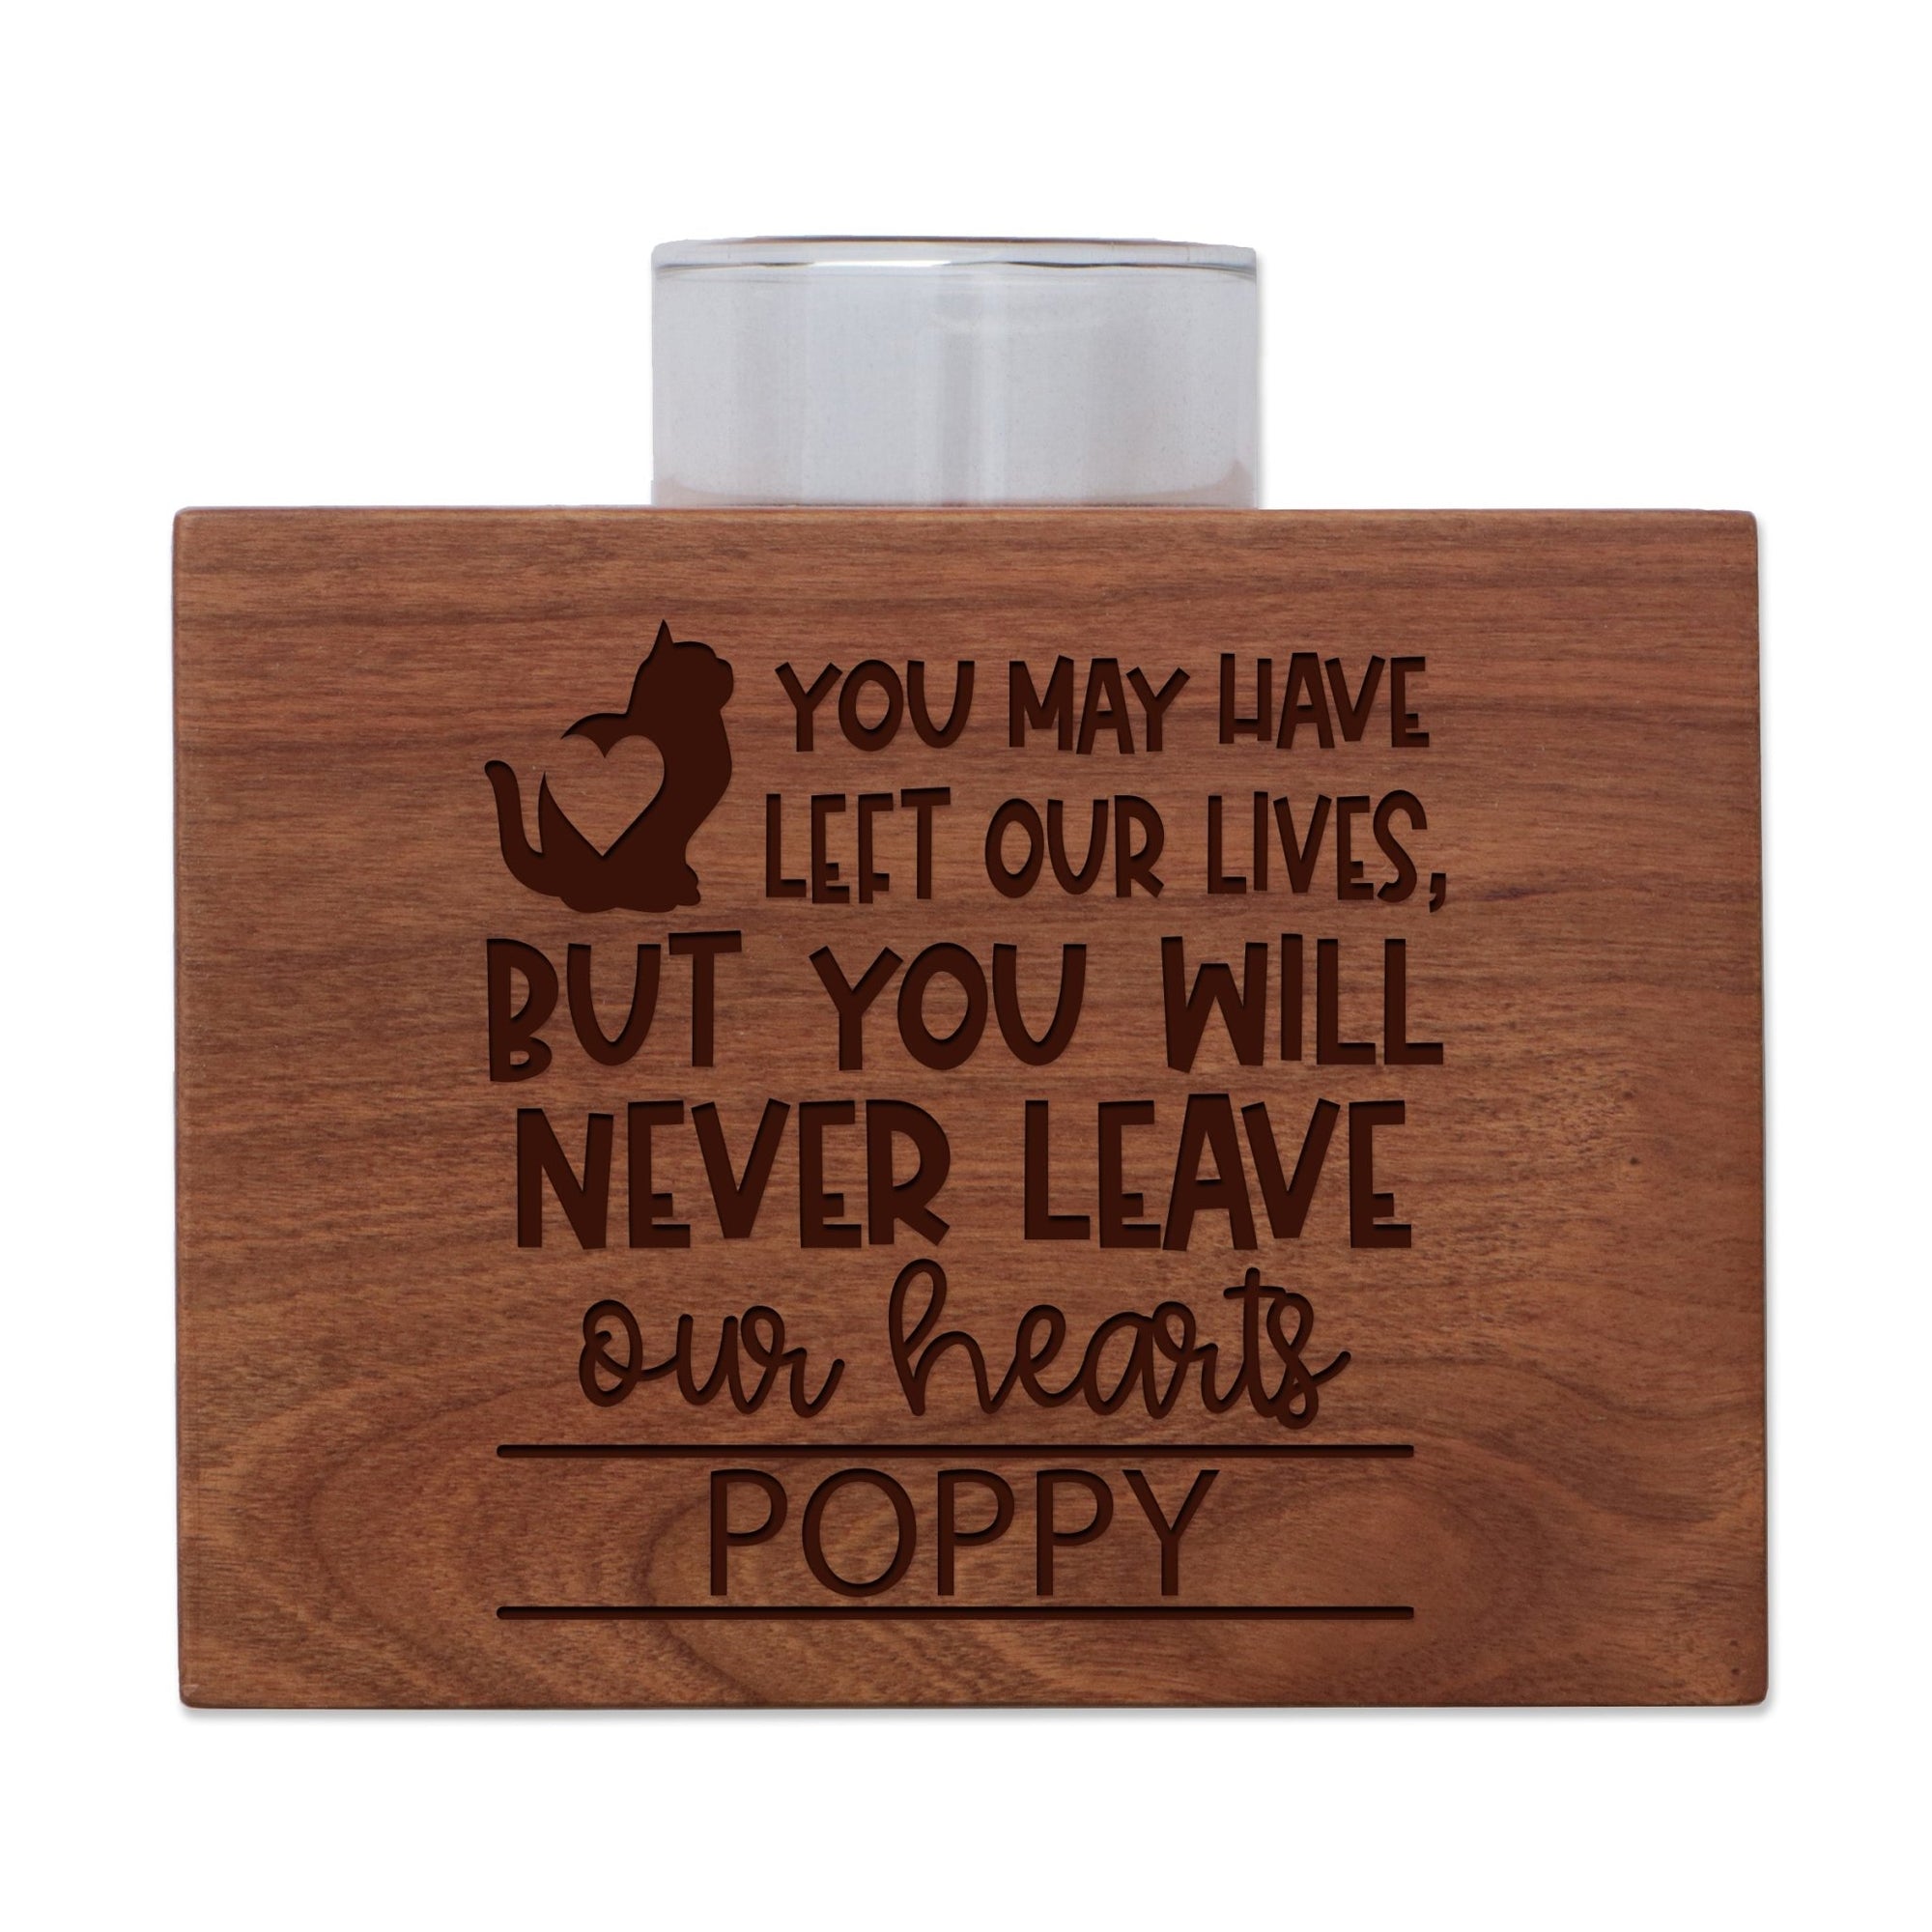 Pet Memorial Single Candle Holder - You May Have Left Our Lives (Cat) - LifeSong Milestones